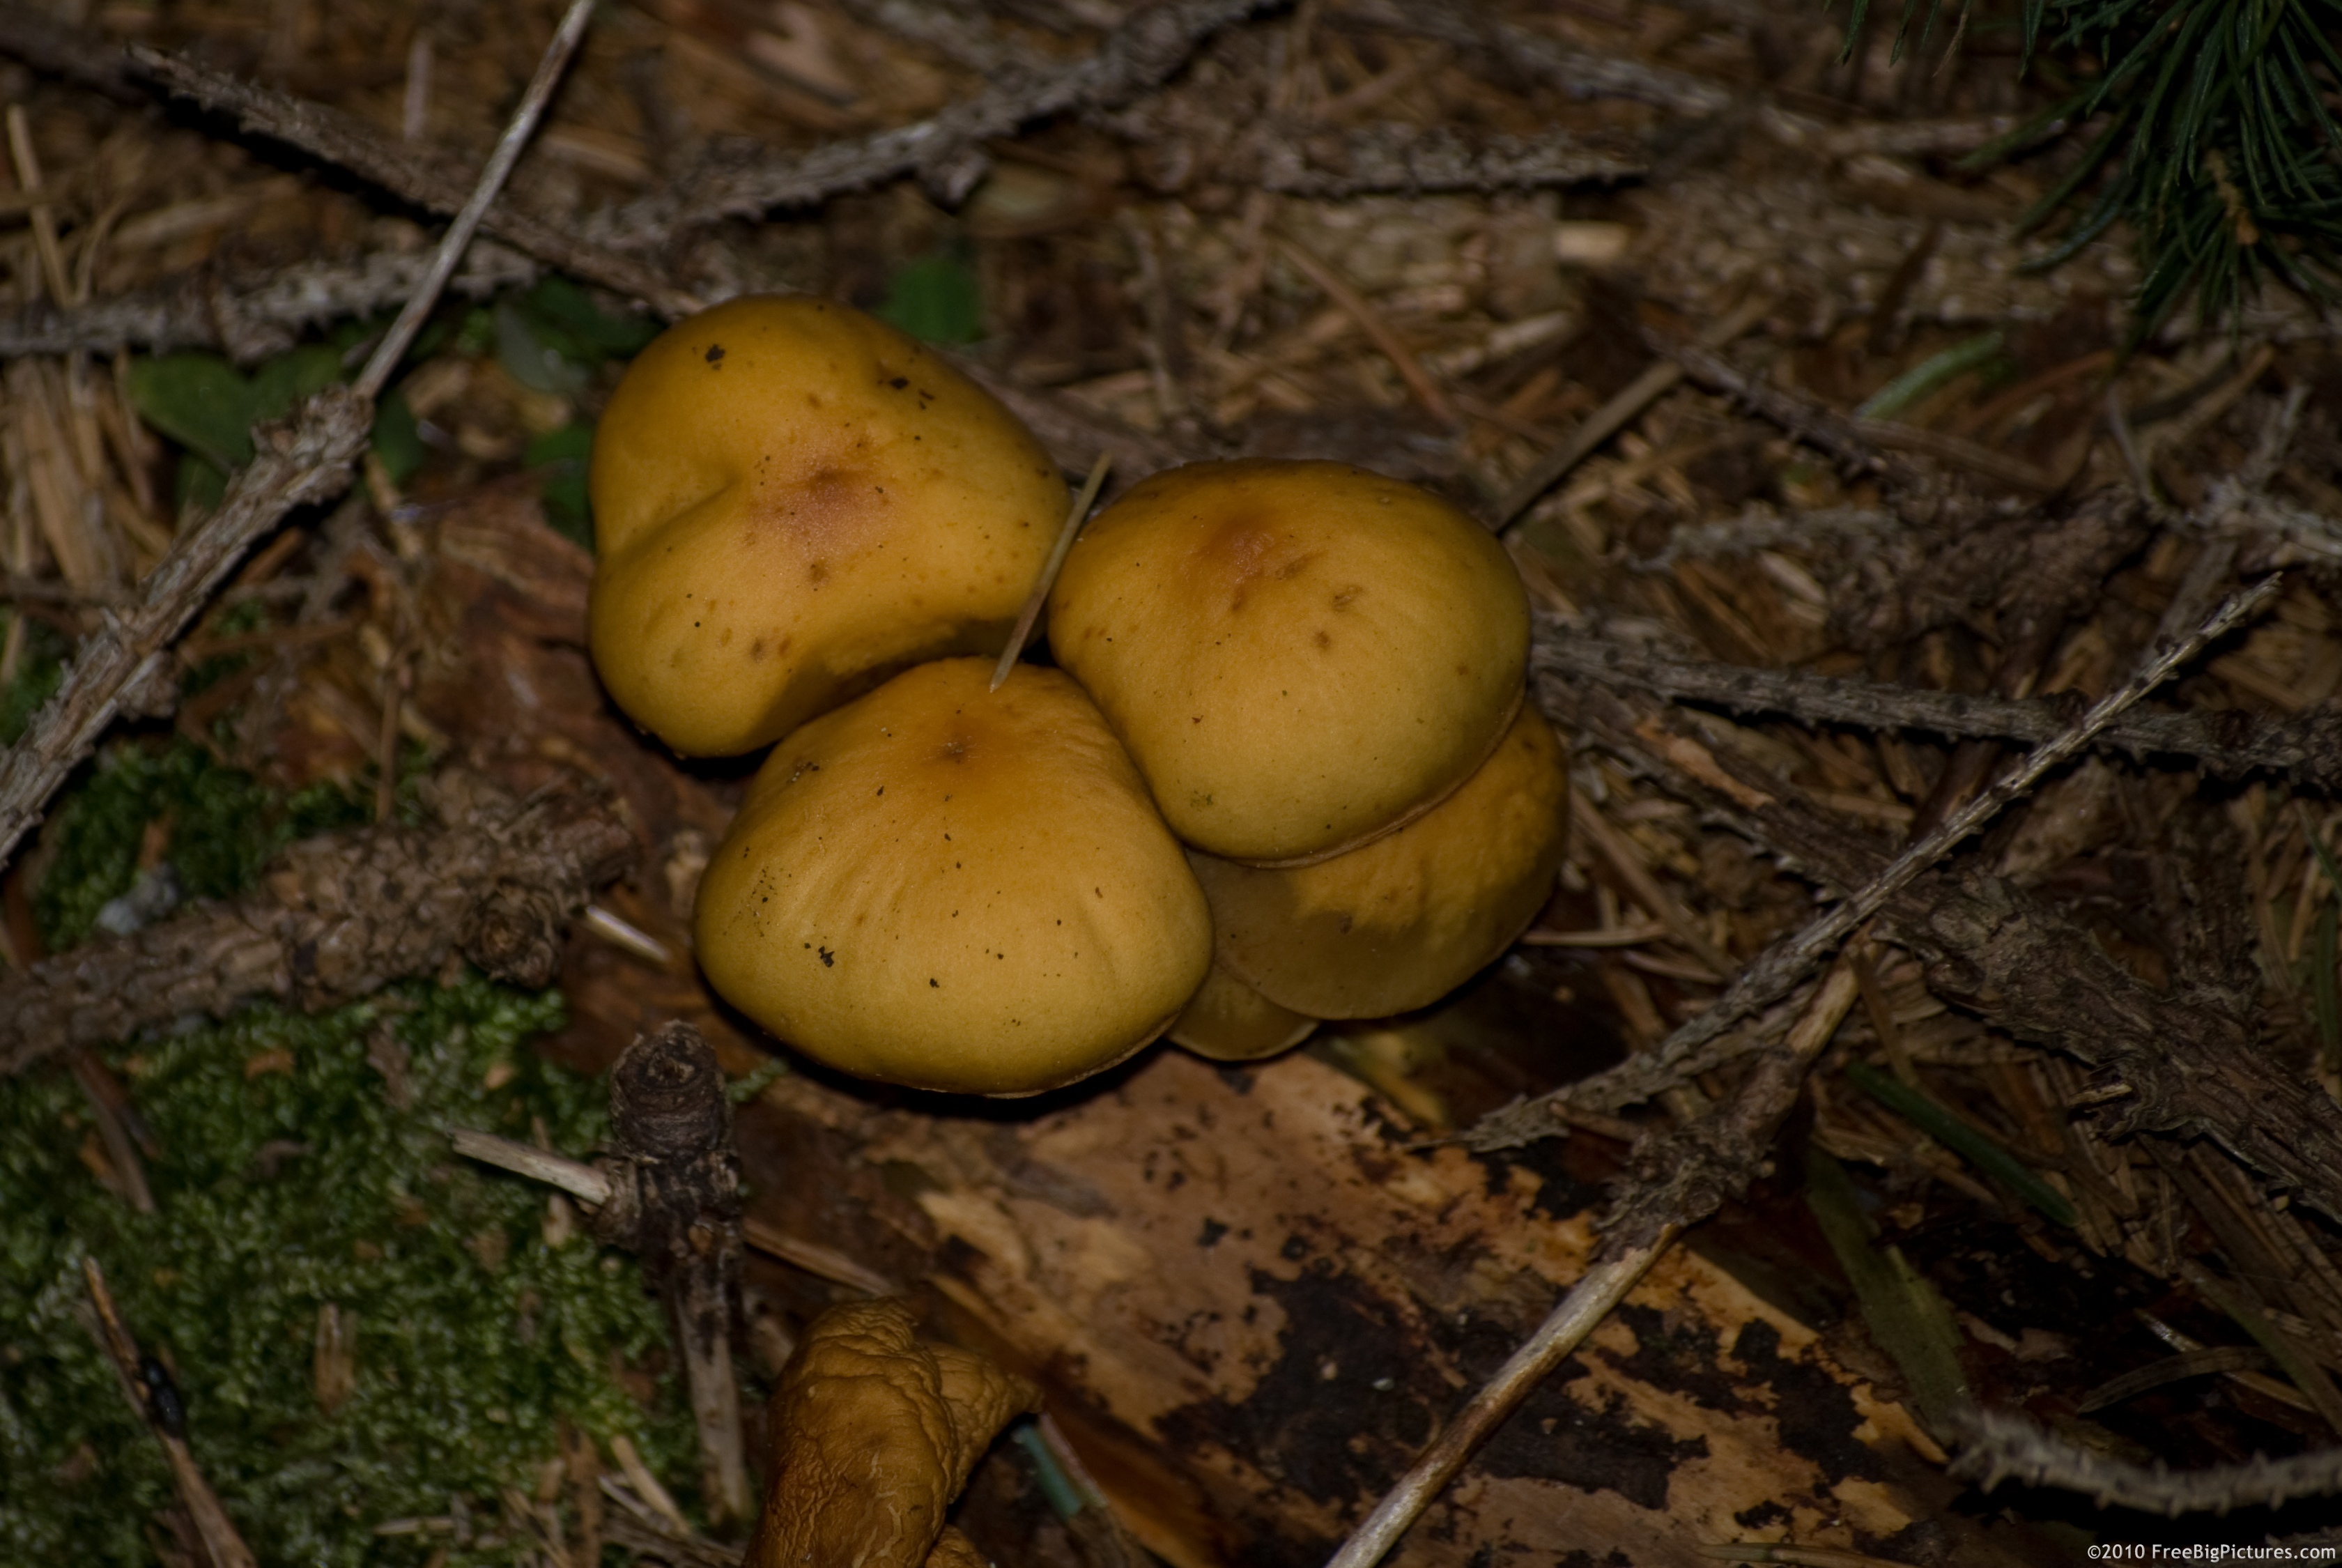 Brick Cap (Hypholoma sublateritium) is considered poisonous in Europe and edible in North America